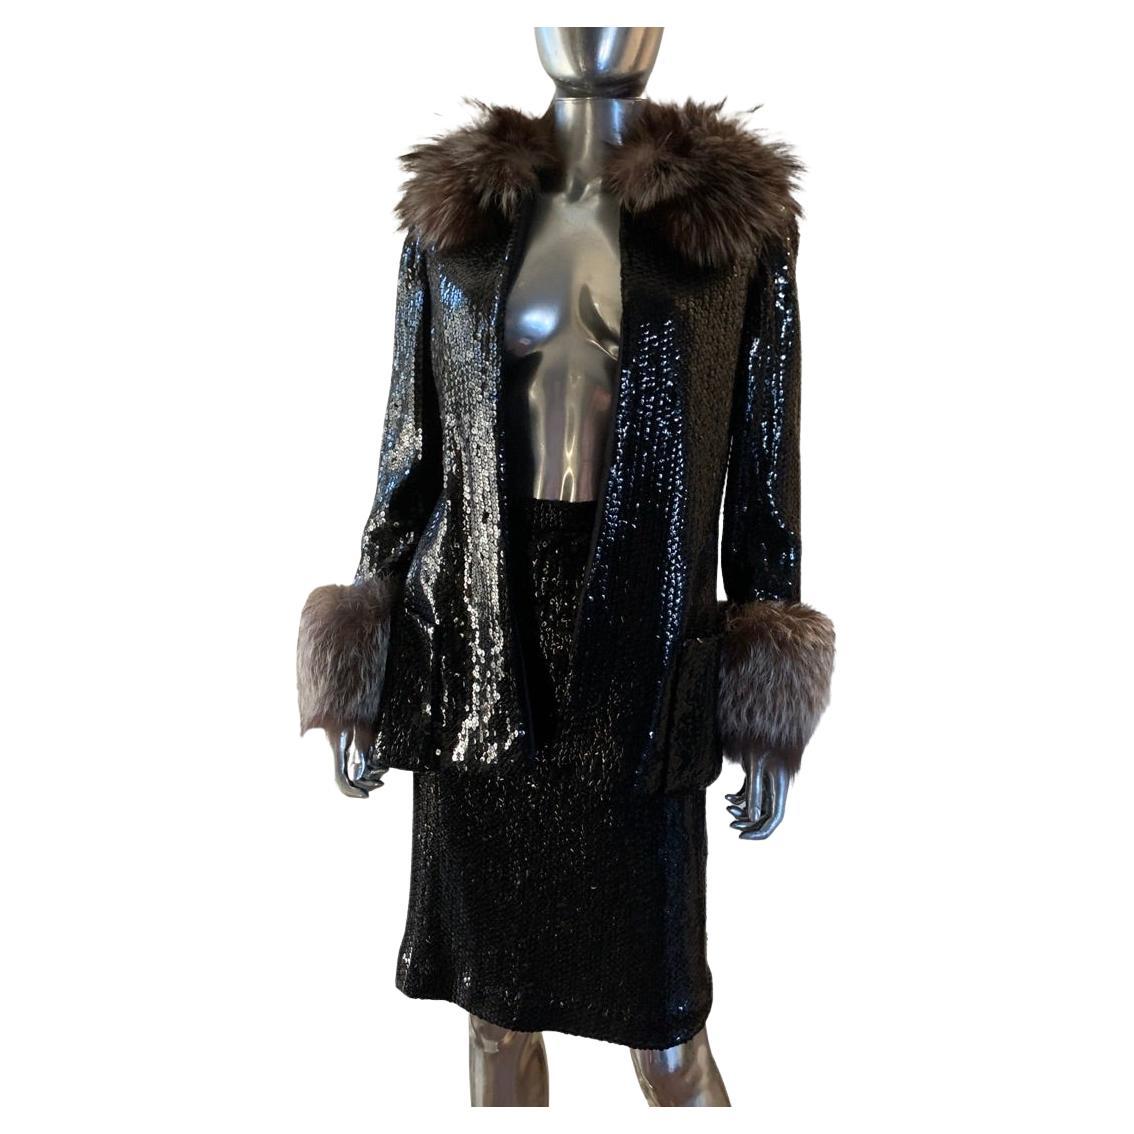 Bill Blass Vintage Black Sequin Suit With Removable Fox Collar & Cuffs Size 6-8